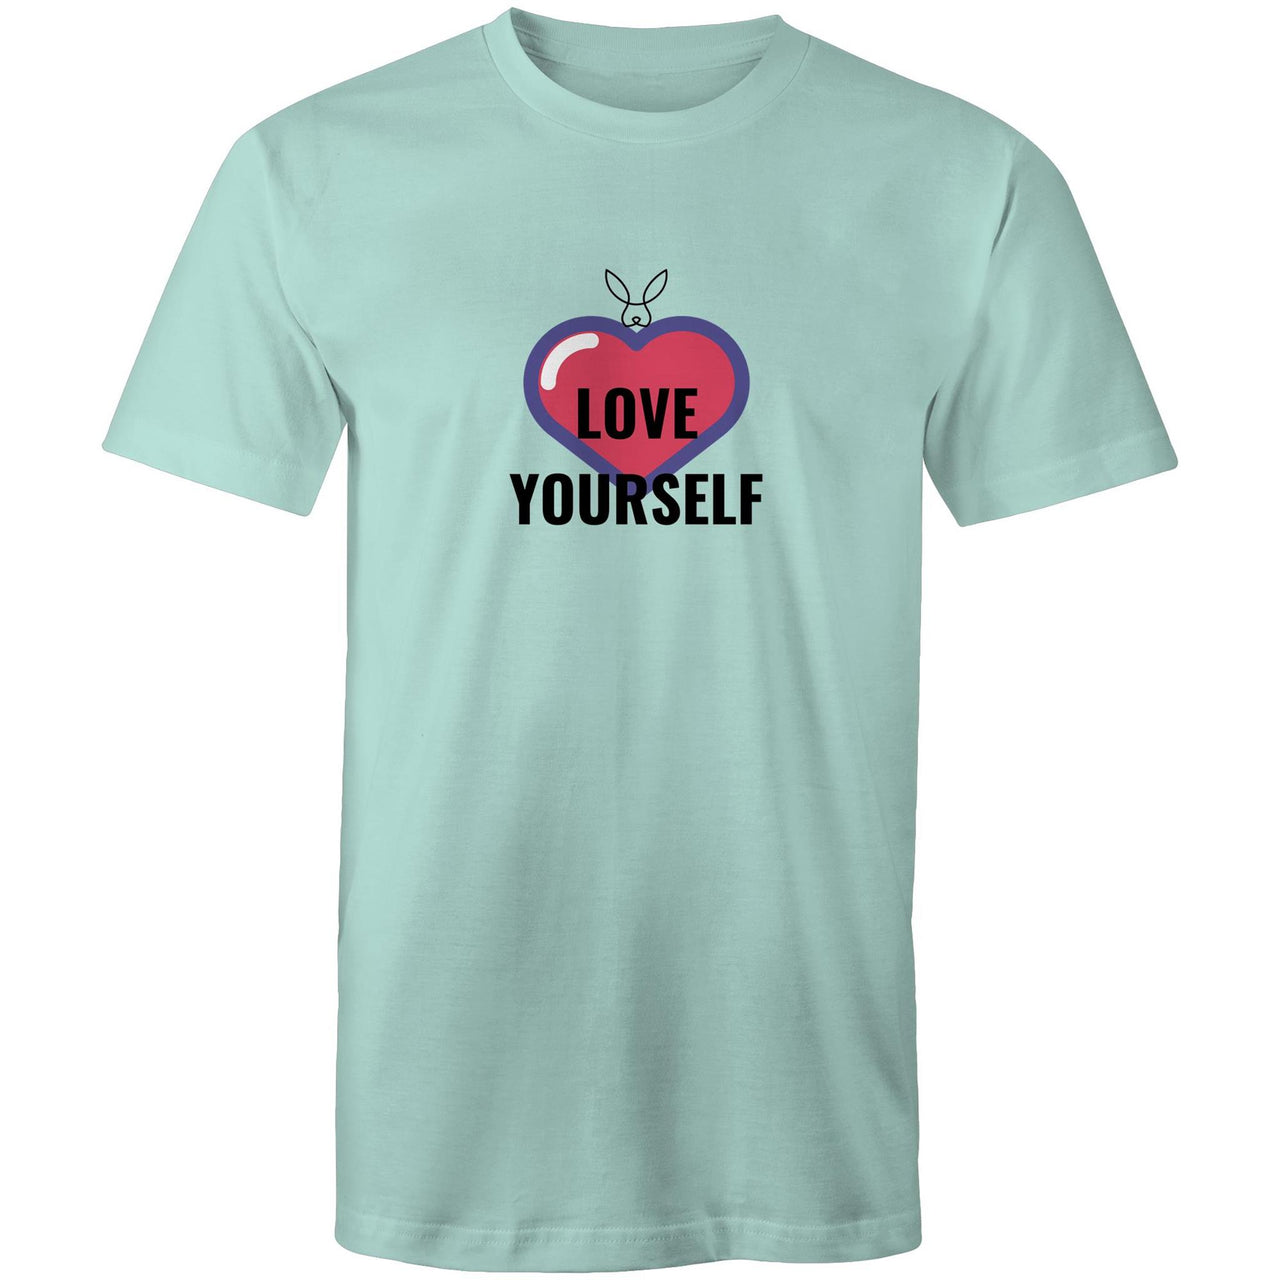 Love Yourself Crew T-Shirt by CBF Clothing Mint